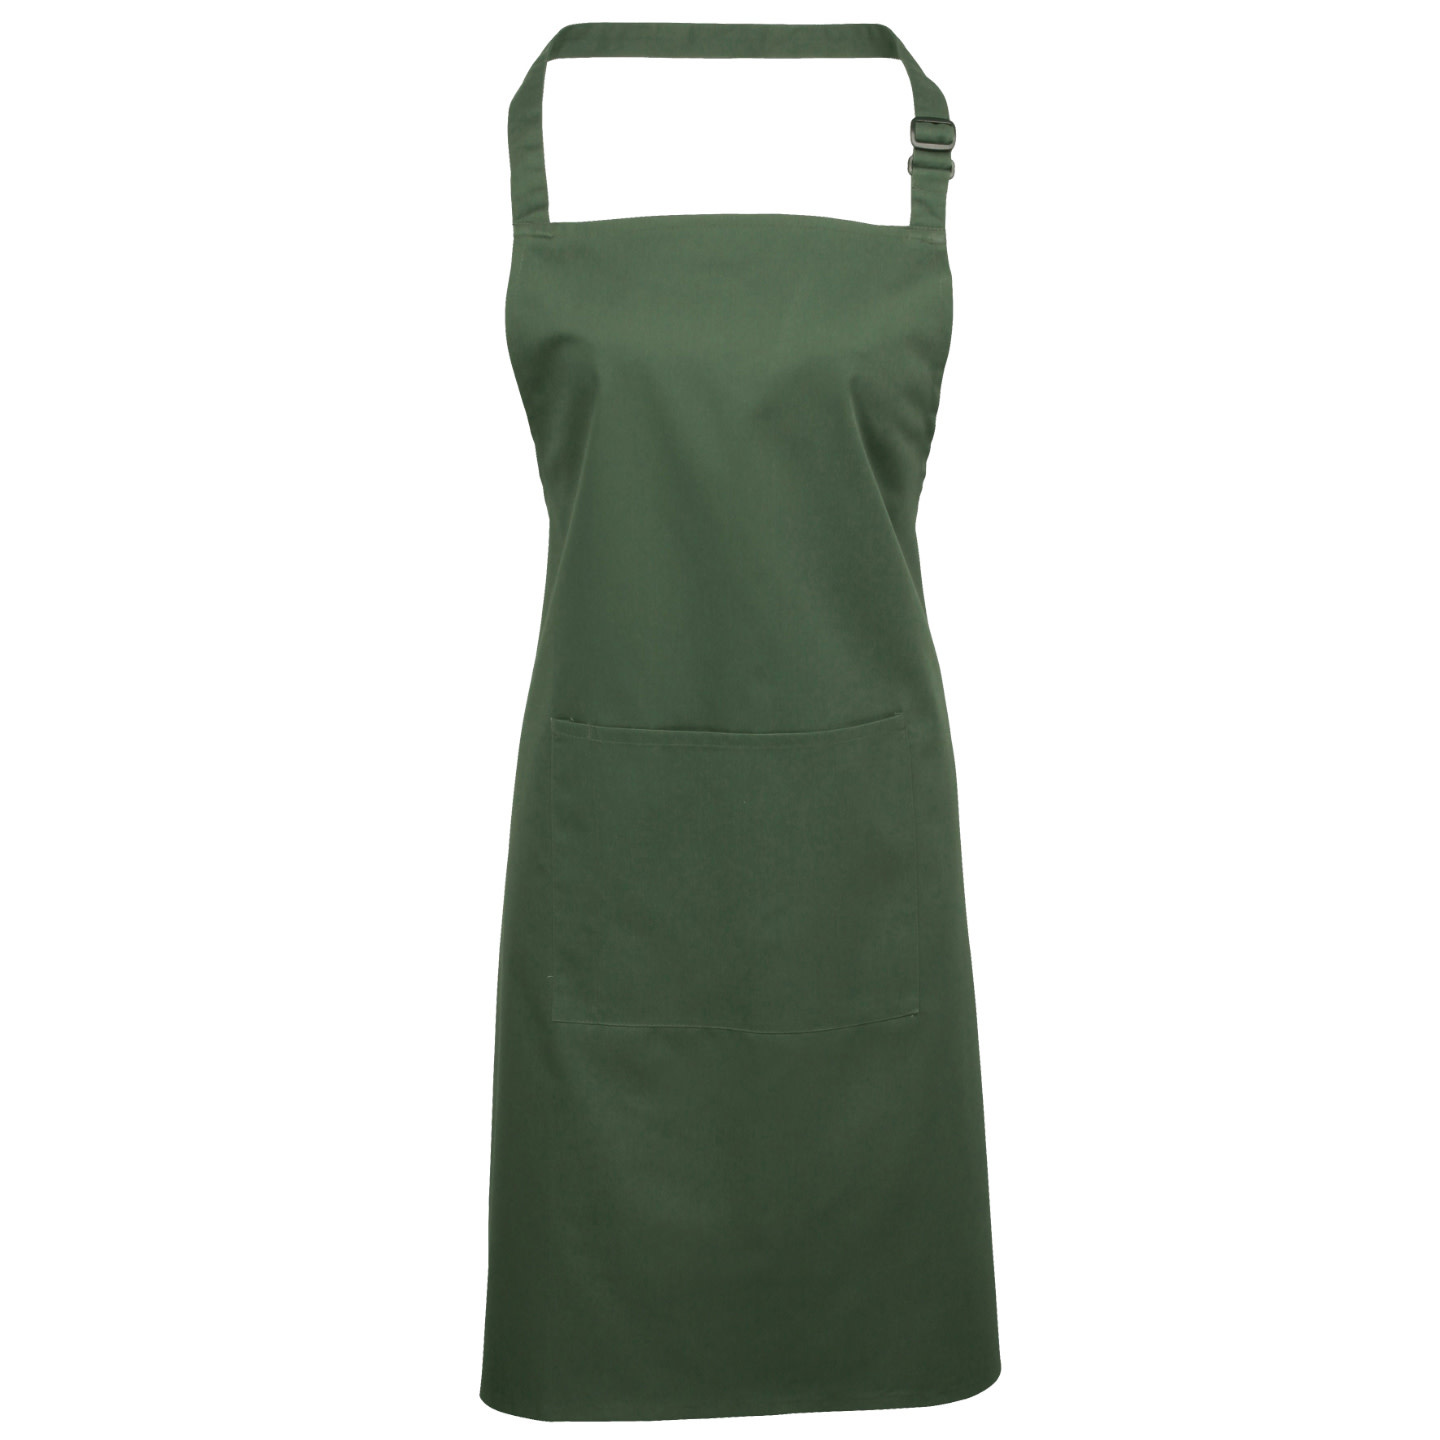 Adults Colours Bib Apron with Pocket